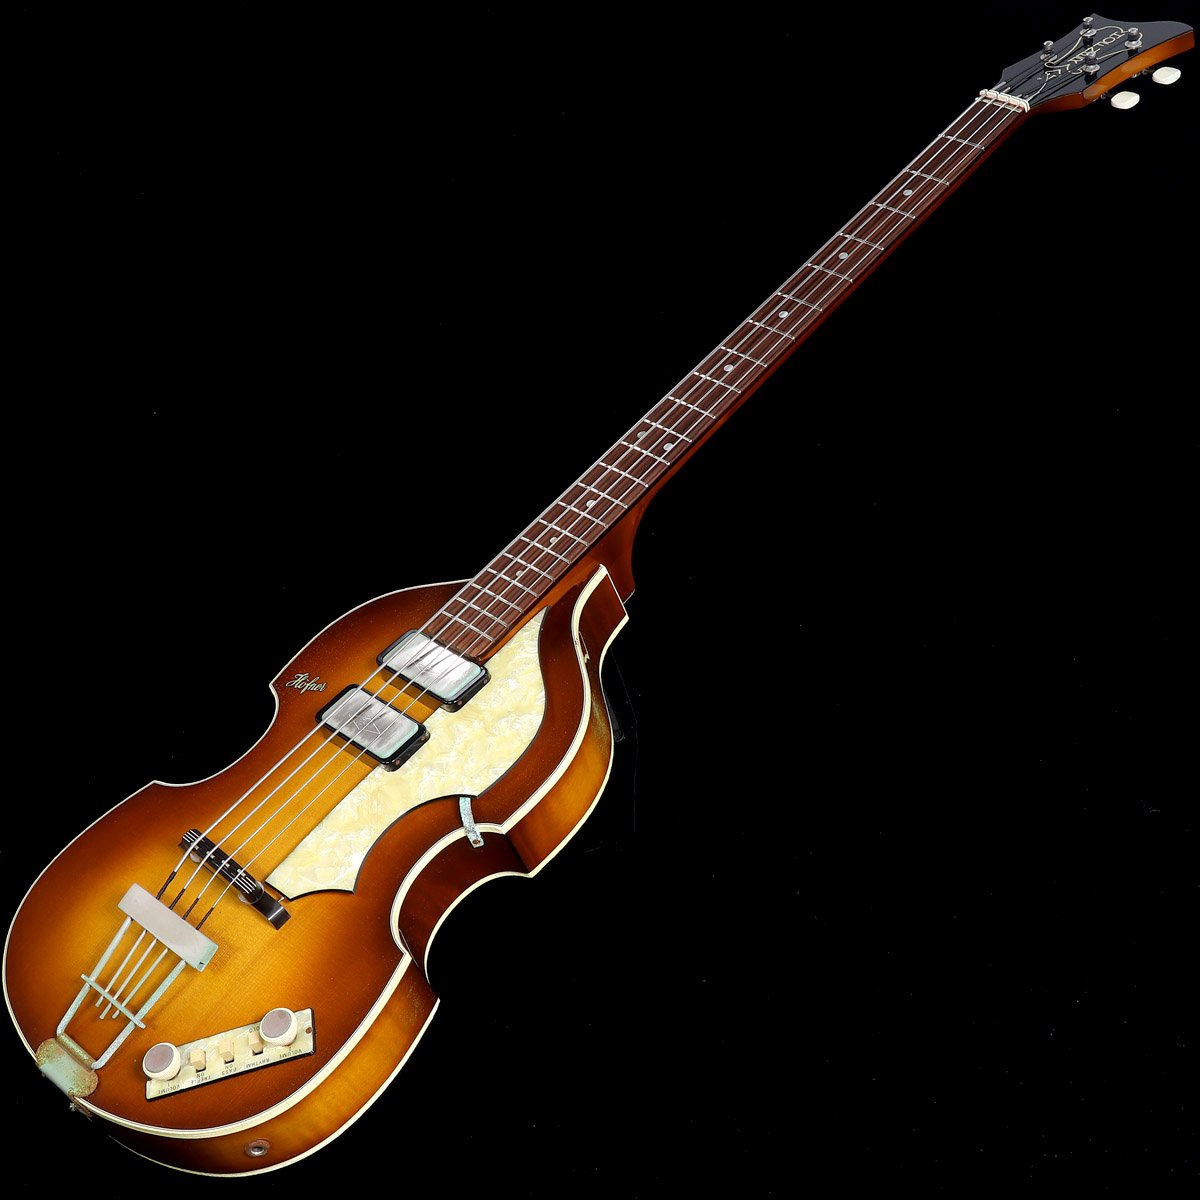 [SN 177] USED Hofner / Limited Edition 500/1 Cavern Bass Reissue 1990s [08]